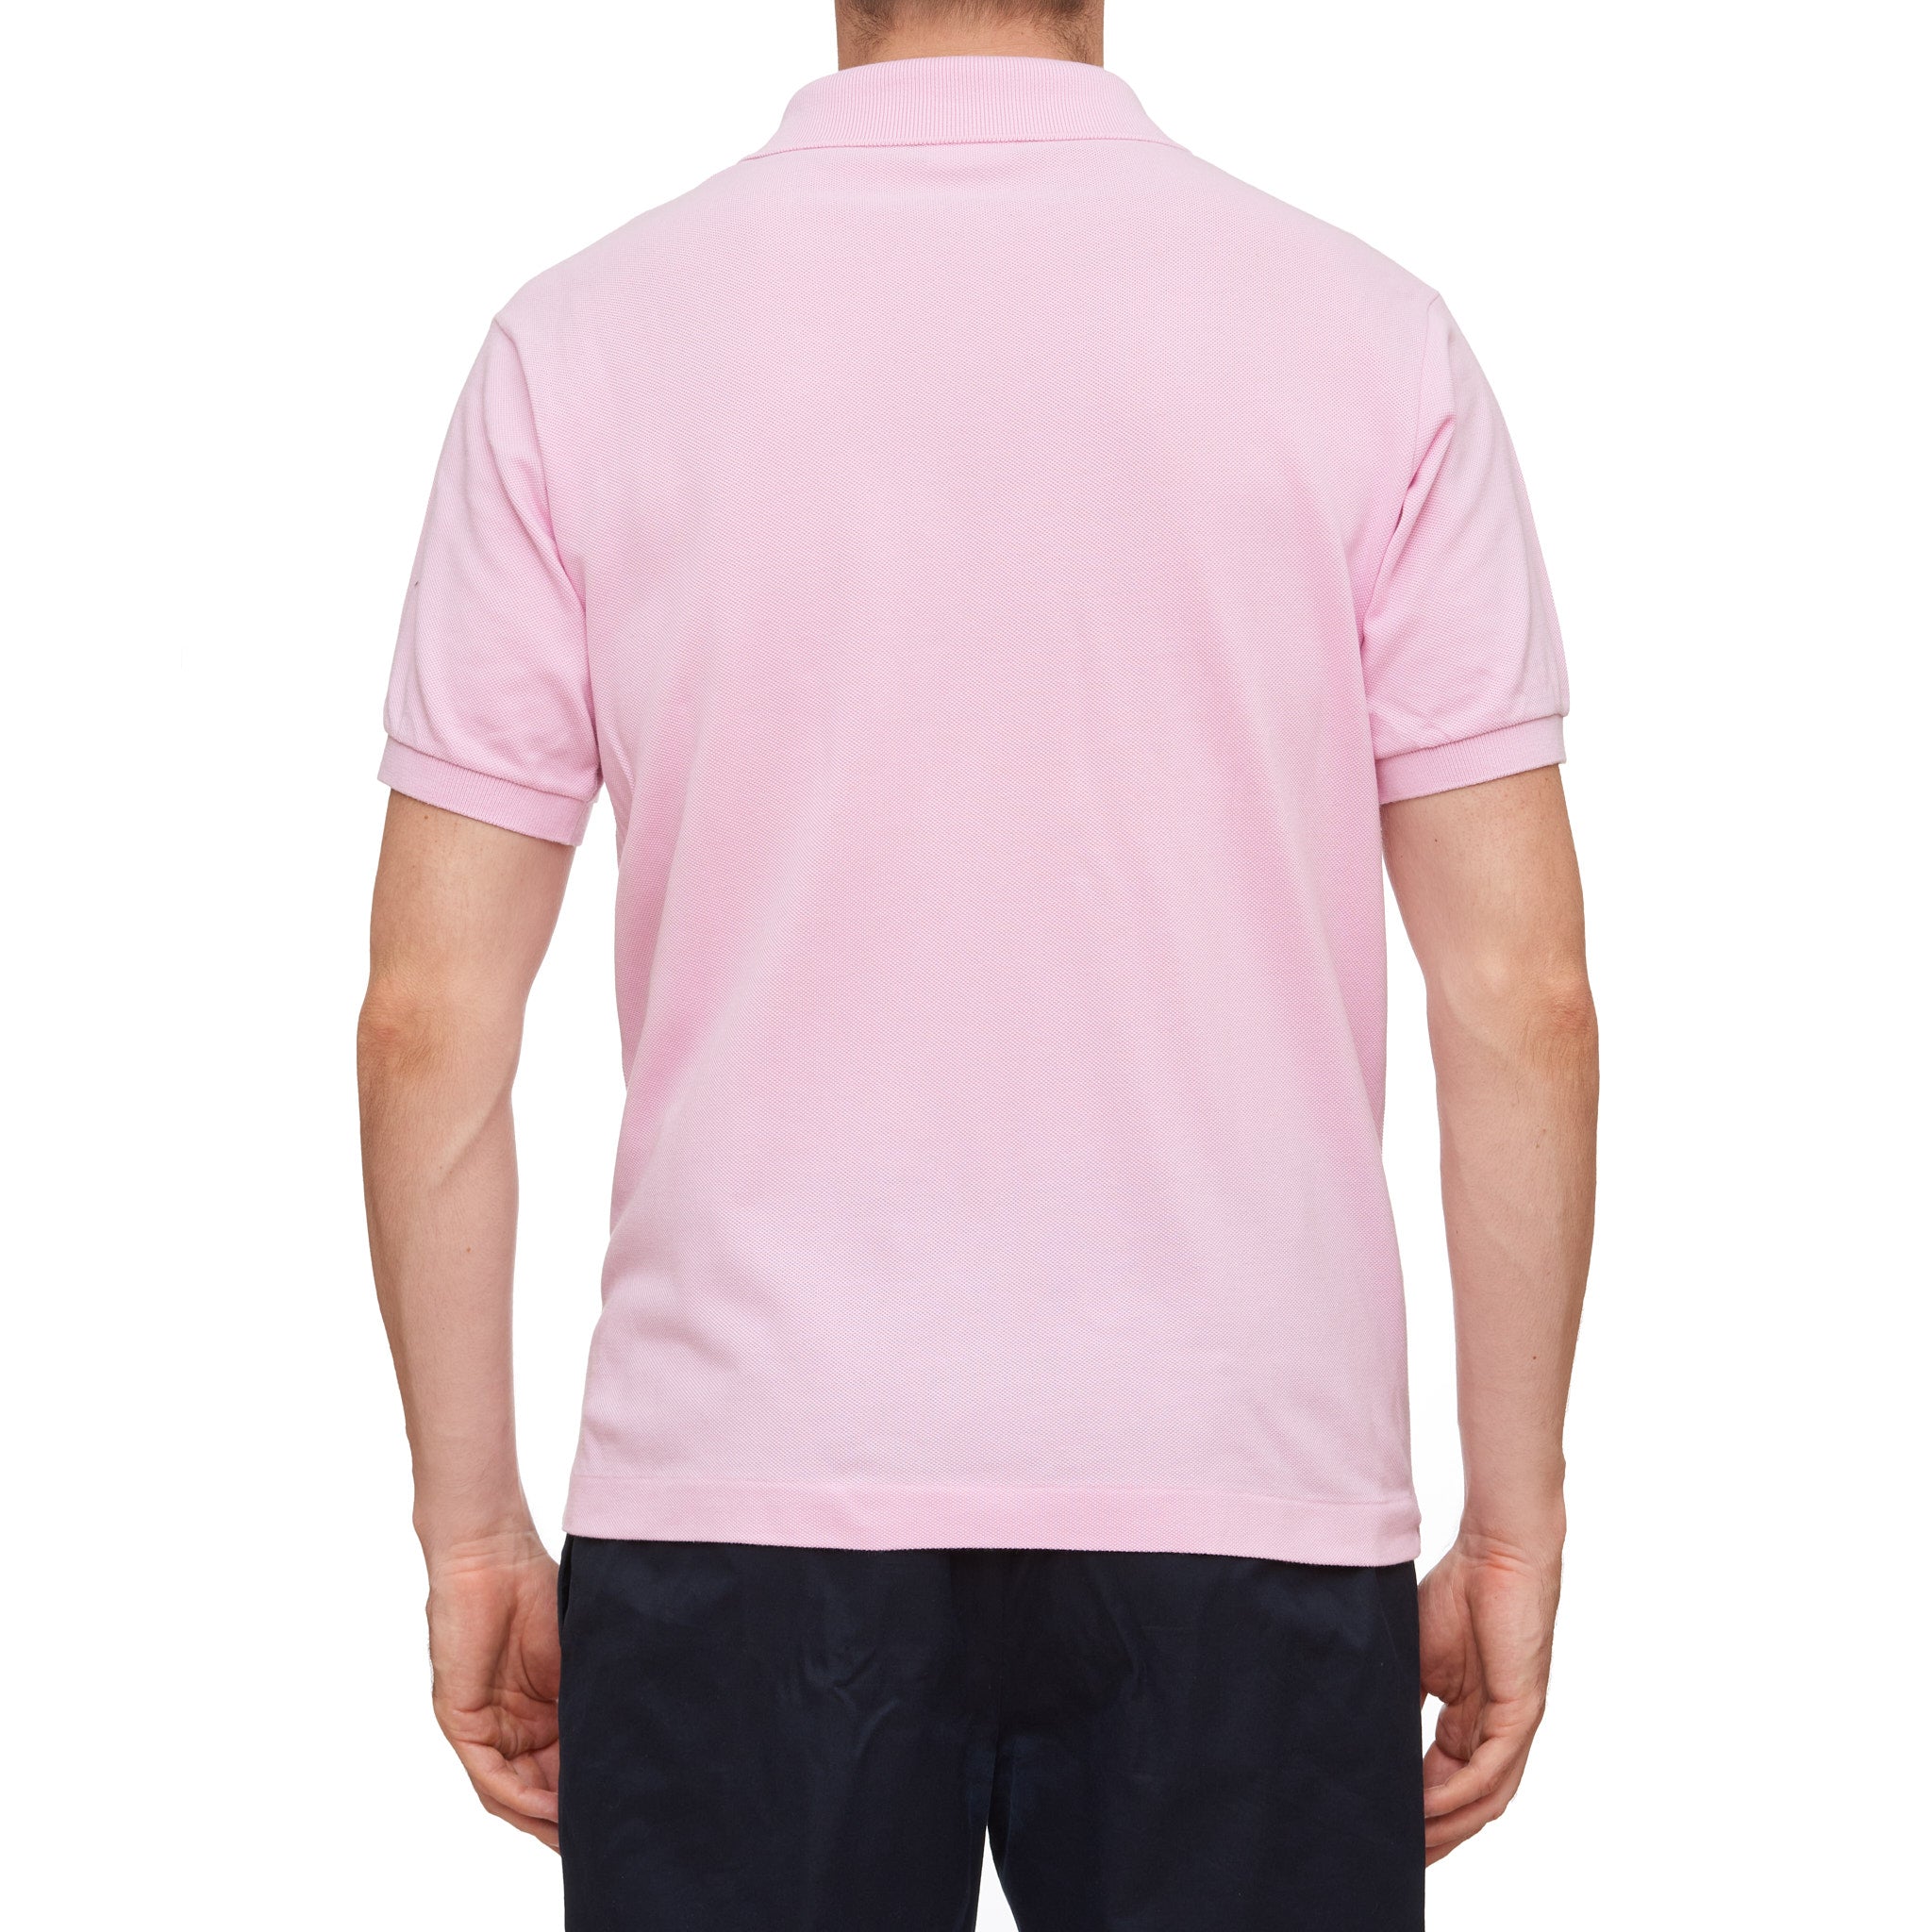 LACOSTE F5191 Devanlay Pink Pique Cotton Short Sleeve Polo FR 4 US M LACOSTE